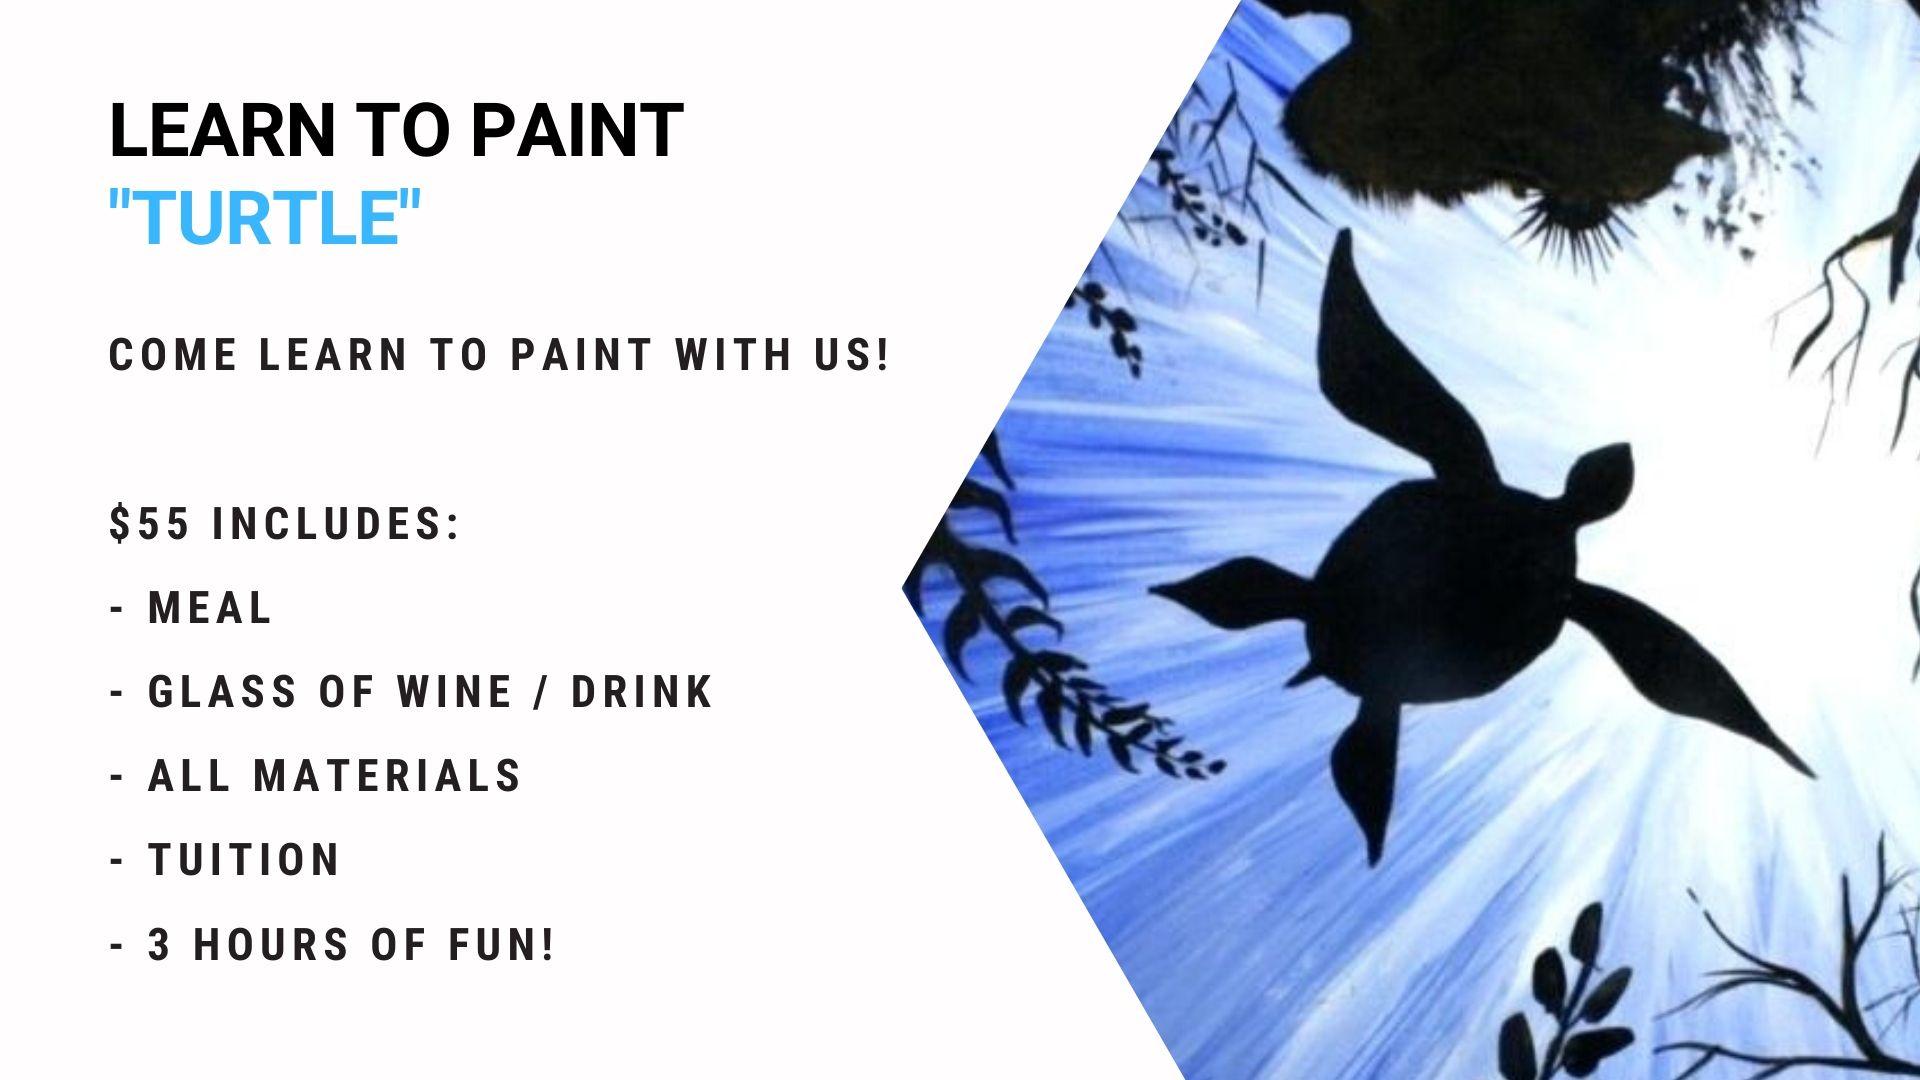 Jets Ipswich - Grab a glass of wine and learn to paint 'Turtle'!